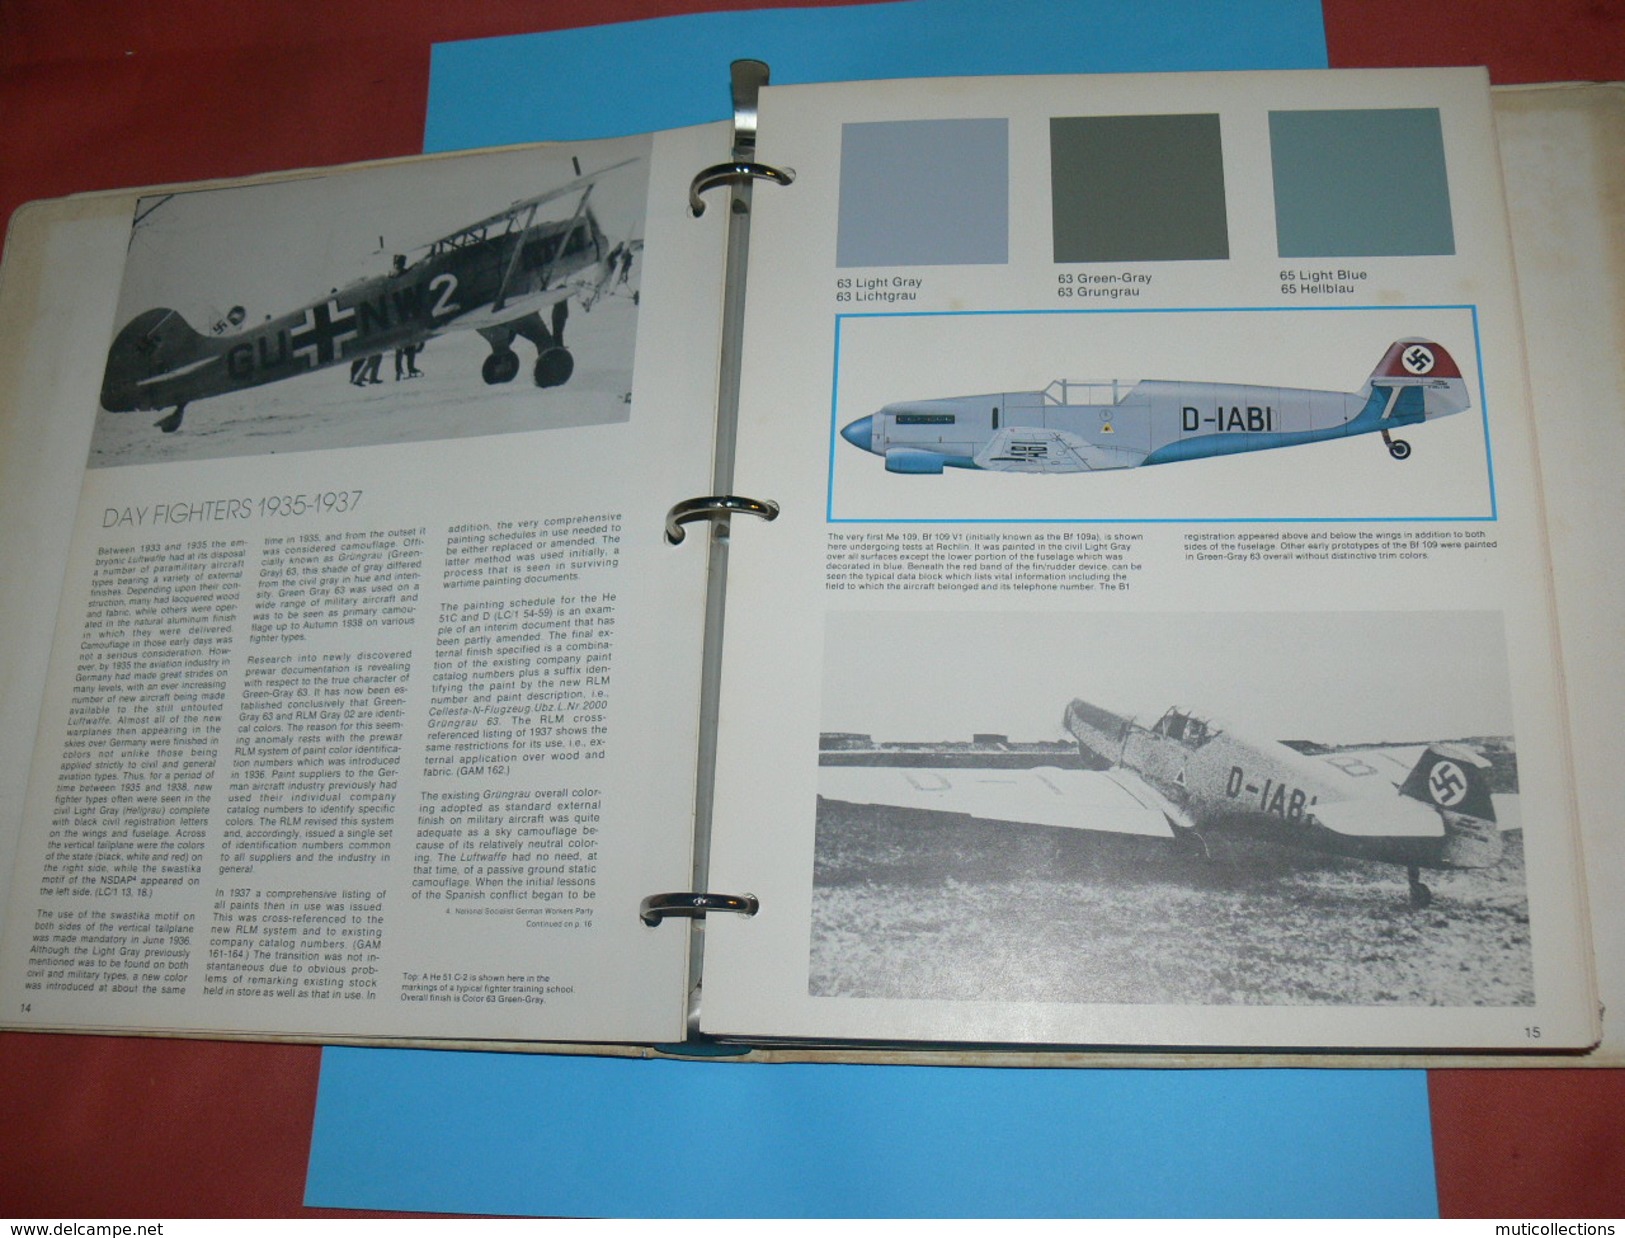 MILITARIA AVION / GUERRE WWII /THE OFFICIAL MONOGRAM PAINTING GUIDE TO GERMAN AIRCRAFT 1935 / 1945 / LUFTWAFFE COLORS